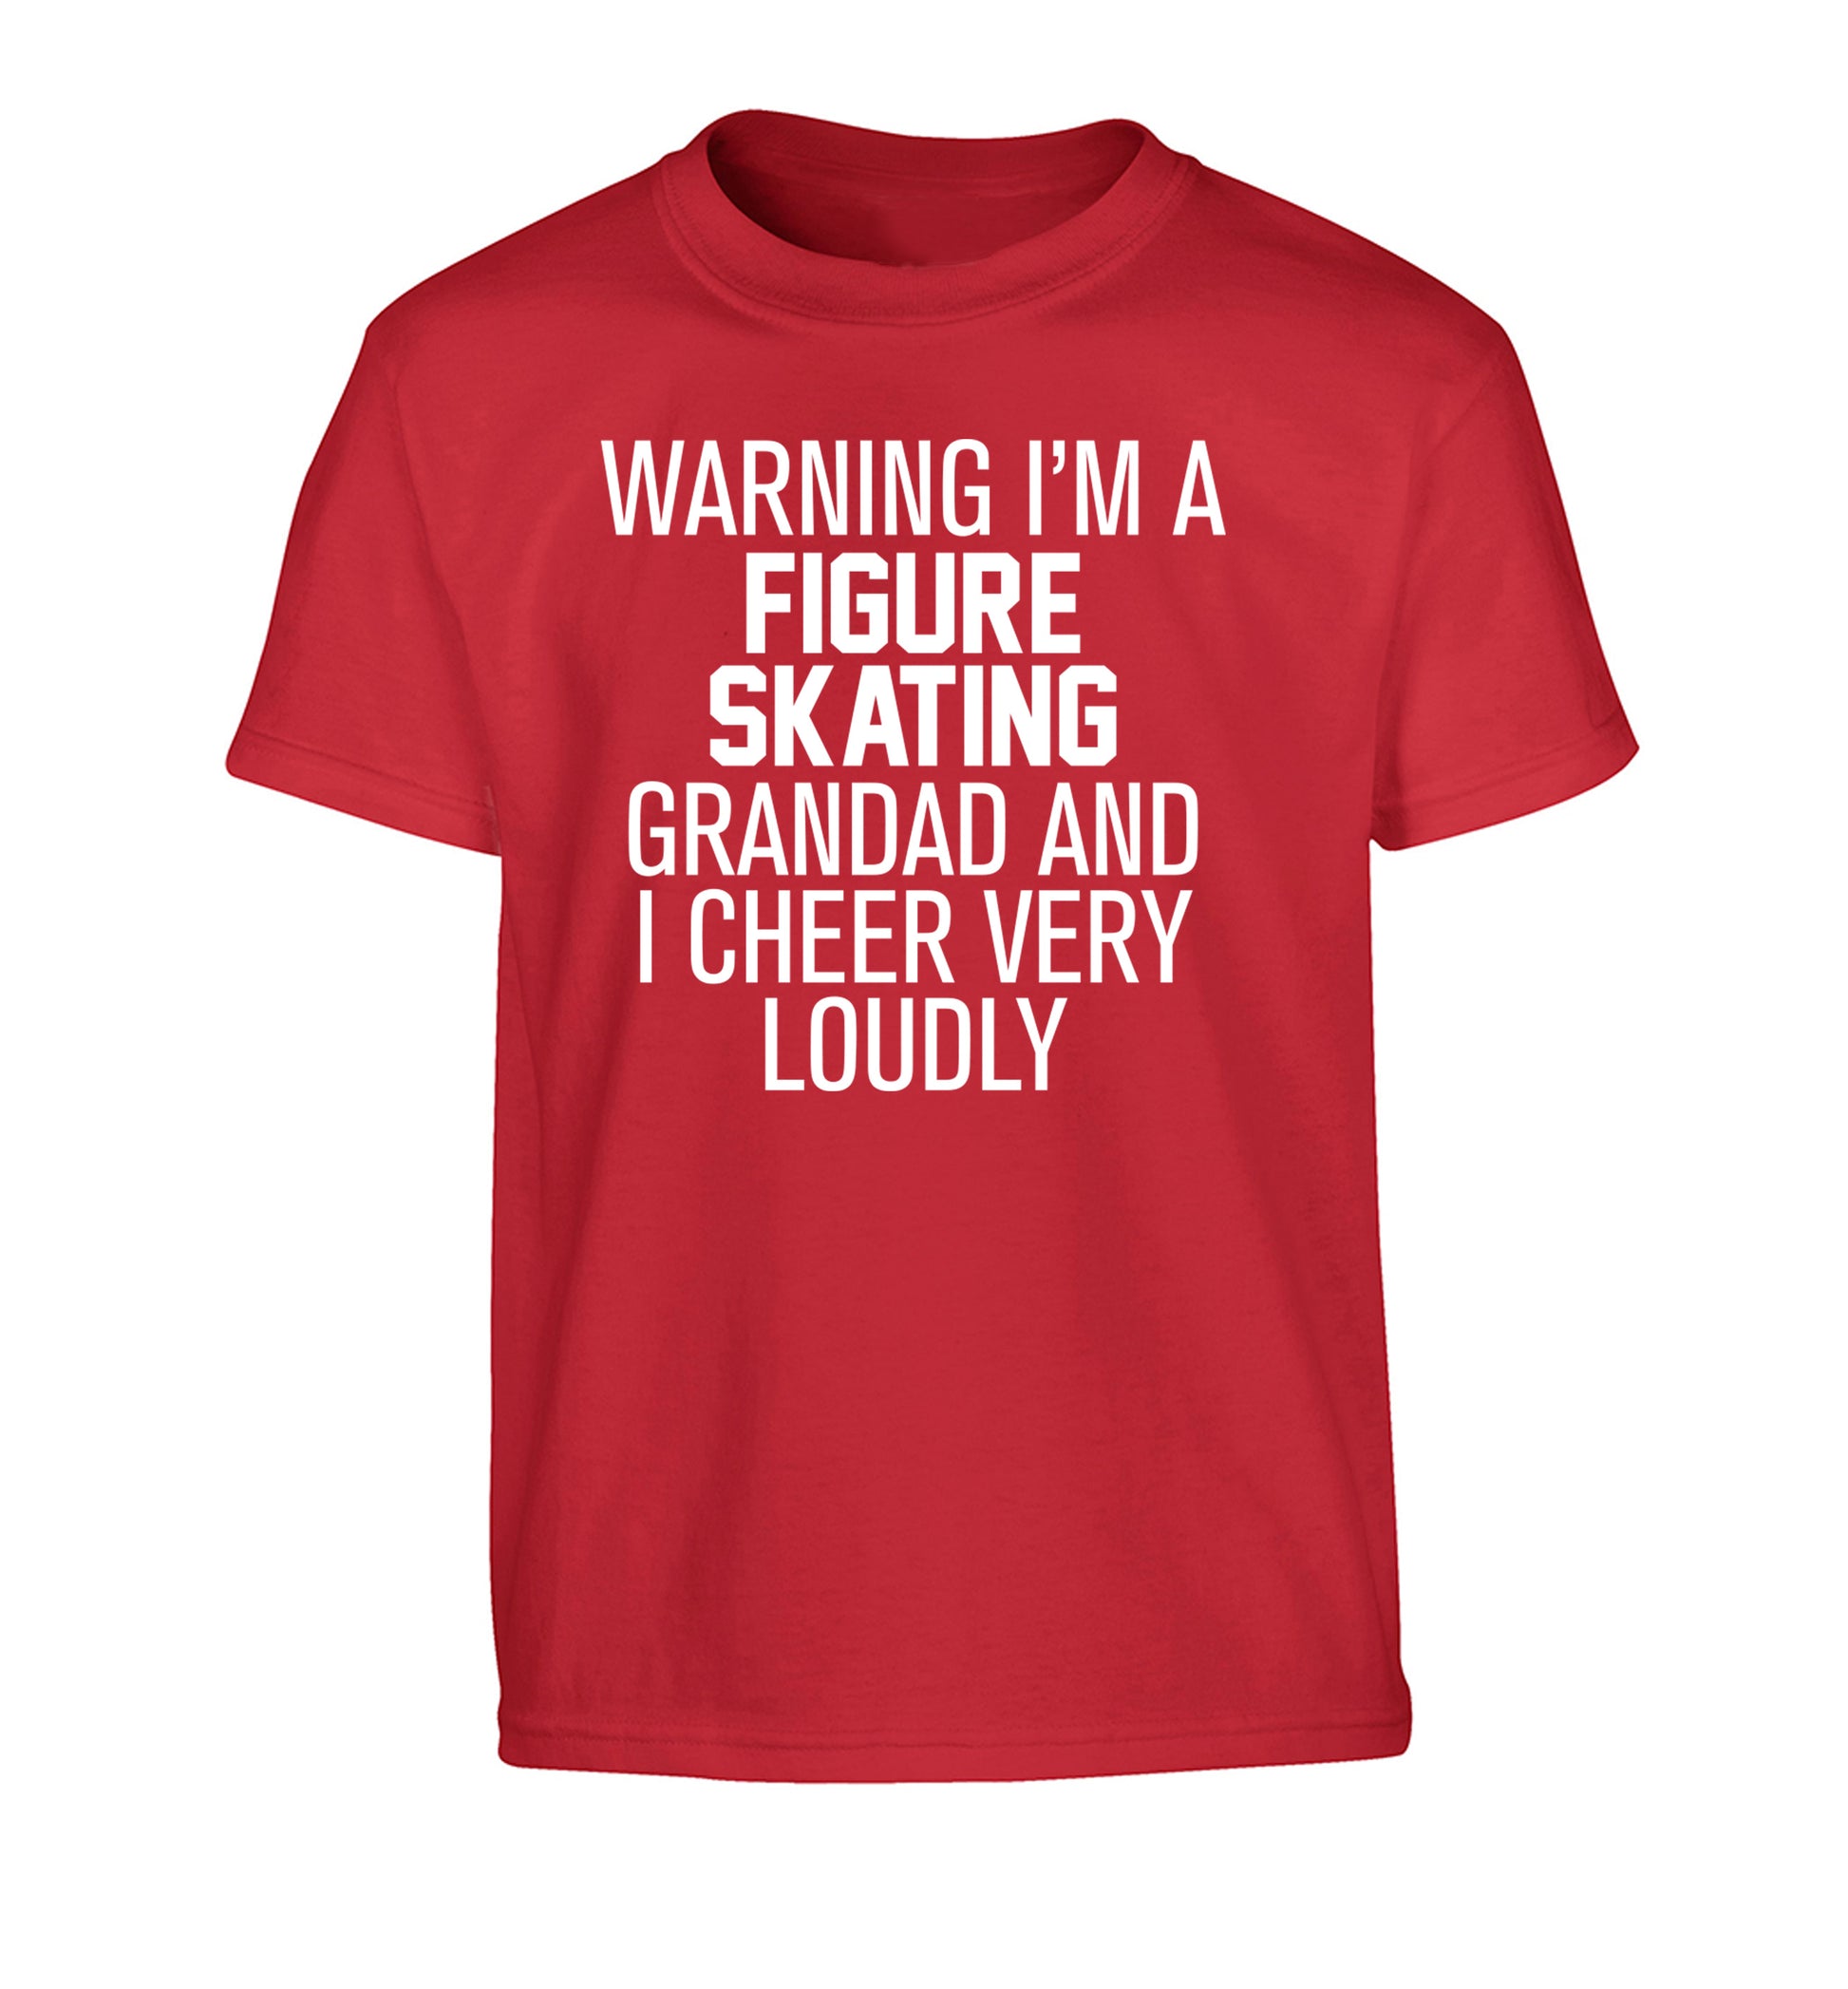 Warning I'm a figure skating grandad and I cheer very loudly Children's red Tshirt 12-14 Years